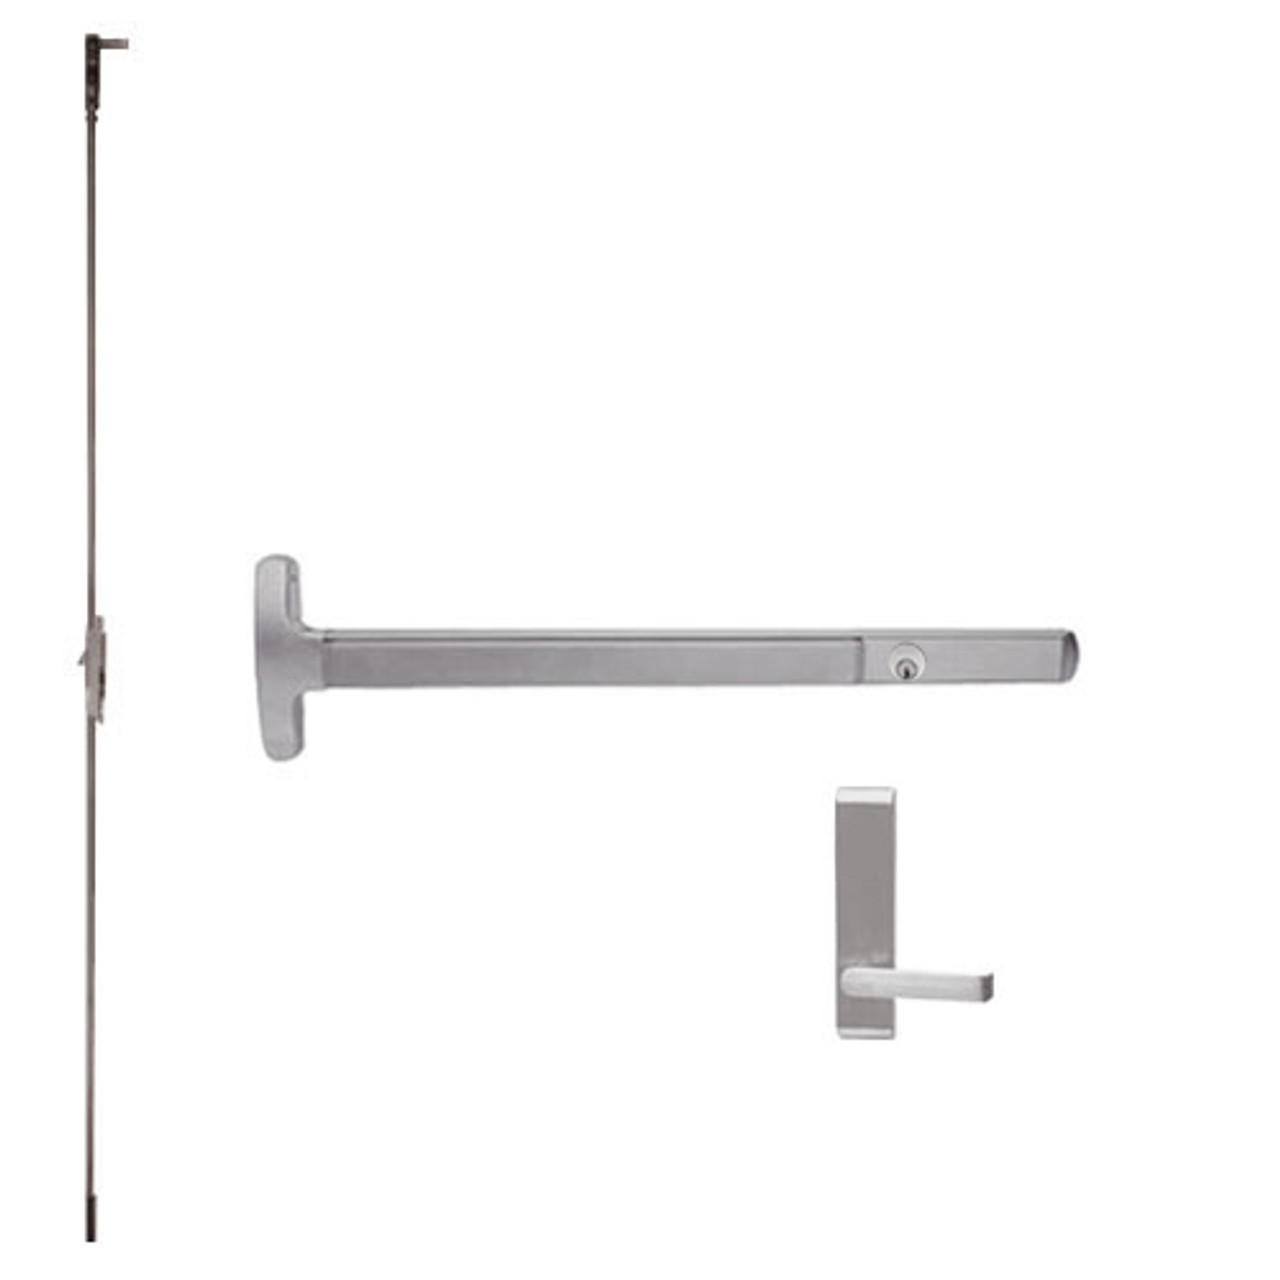 CD24-C-L-DT-DANE-US32D-2-LHR Falcon Exit Device in Satin Stainless Steel